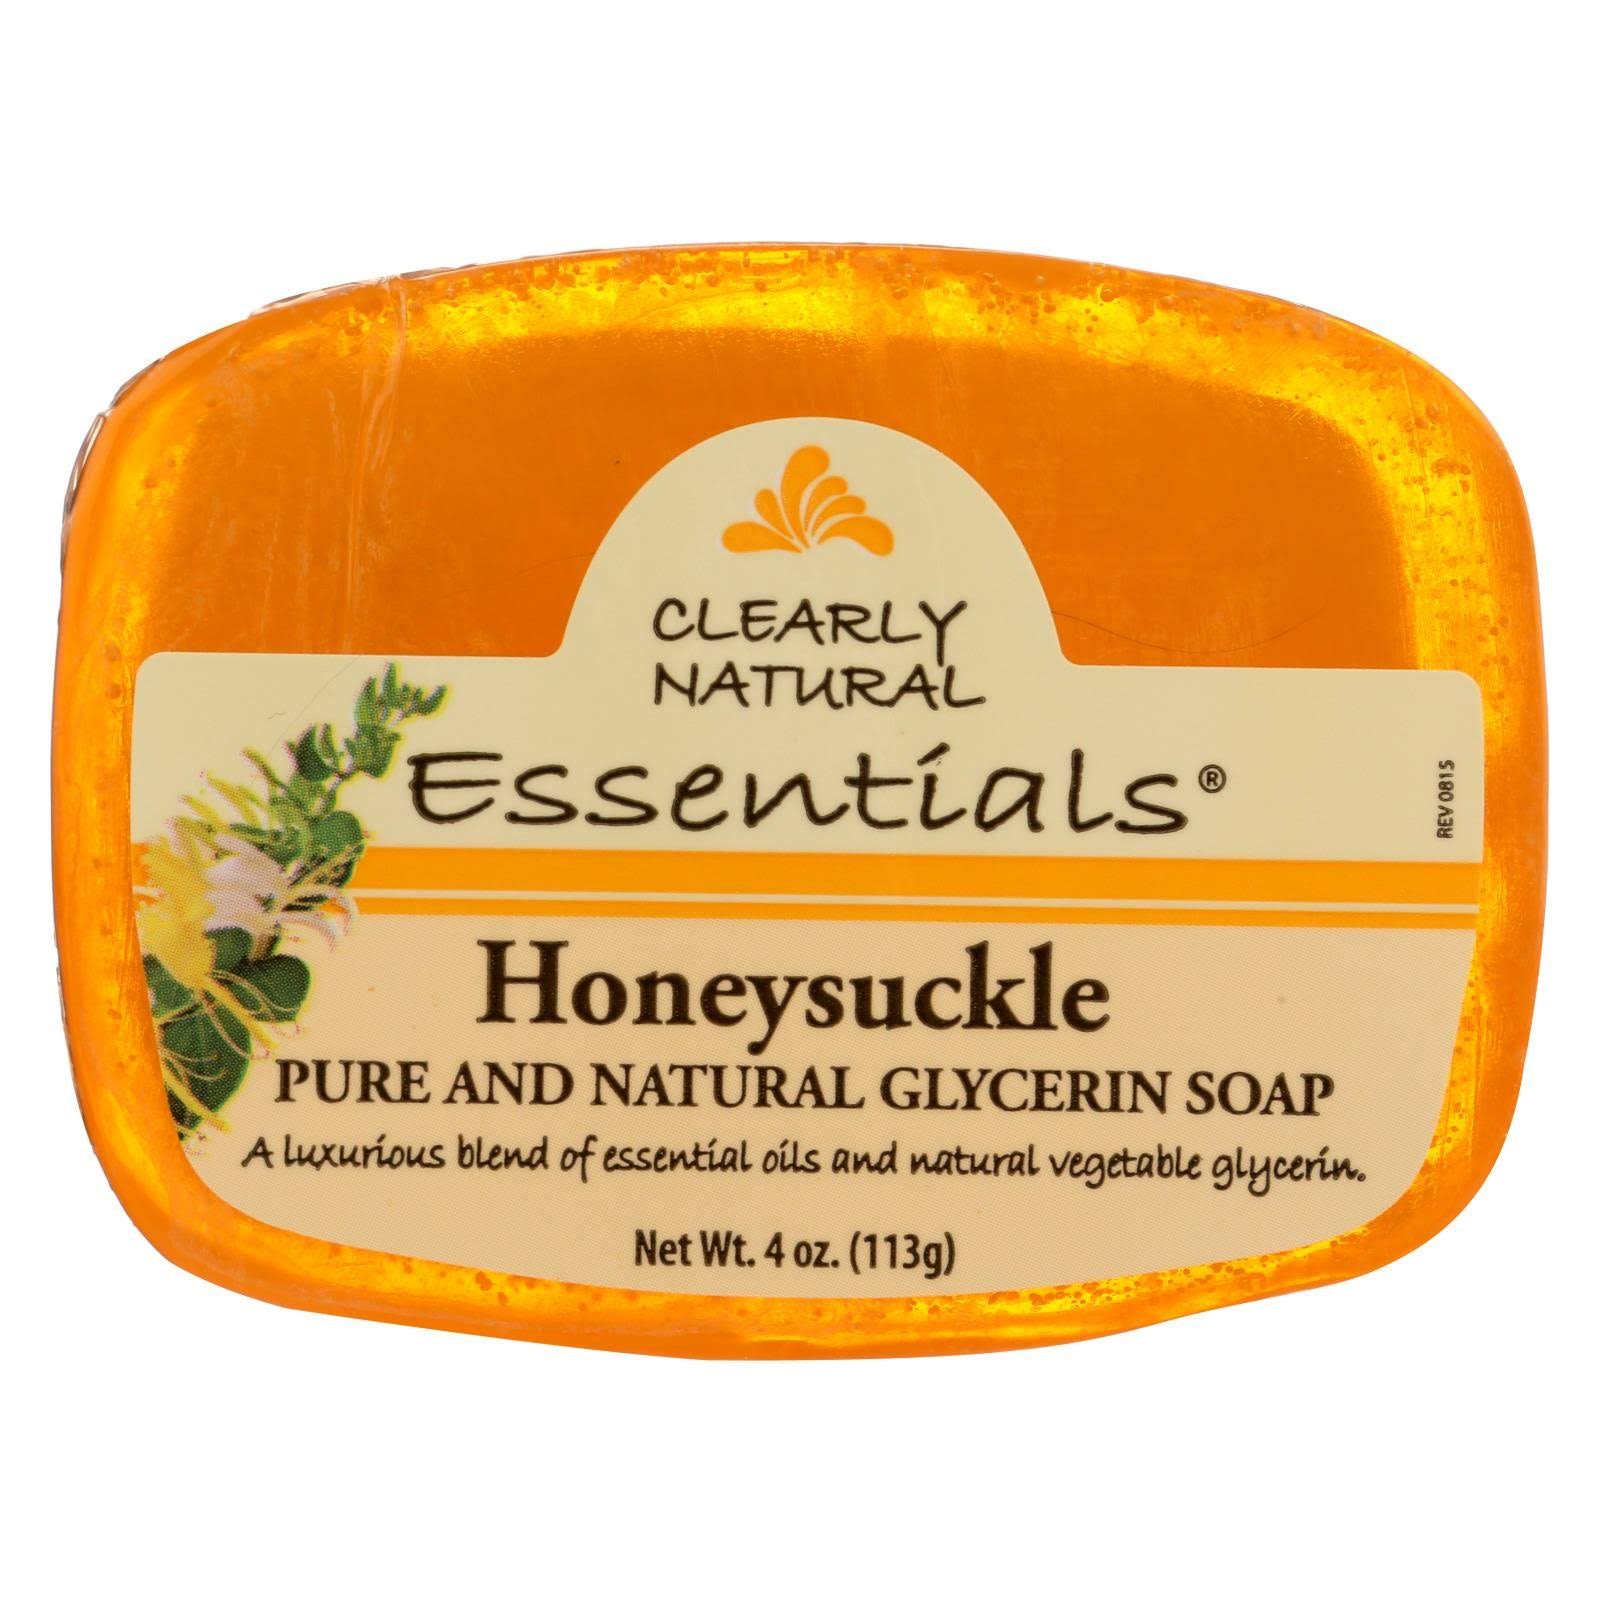 Clearly Natural Essentials Pure and Natural Glycerine Soap - Honeysuckle, 4oz